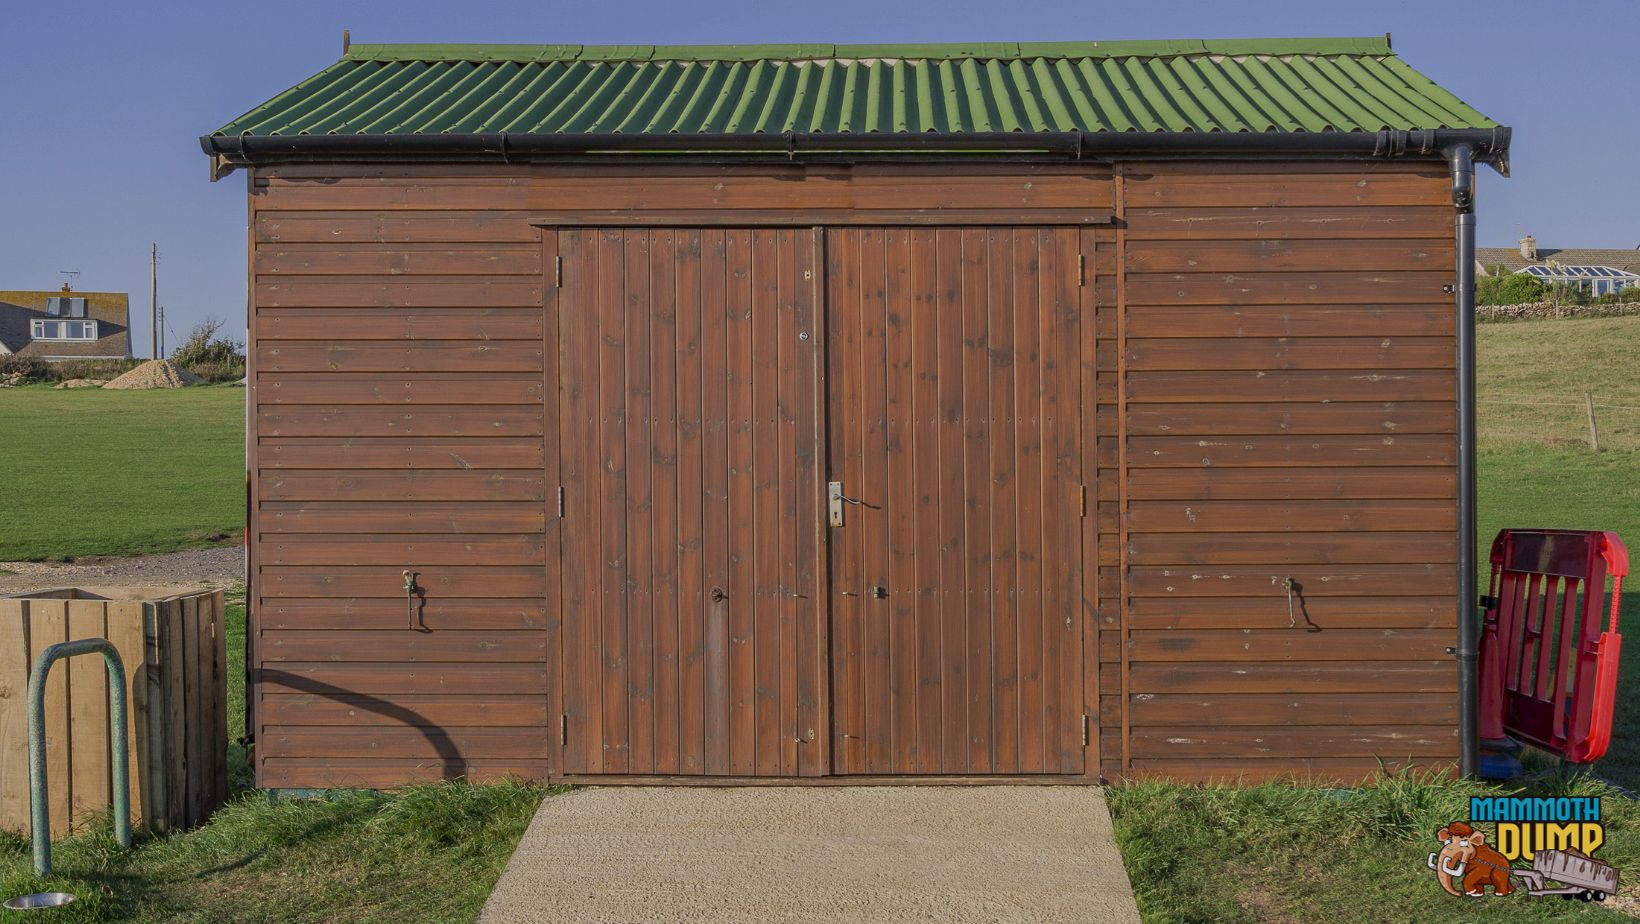 Brown shed with a green roof built out on an open field with paved pathway leading up to the doors